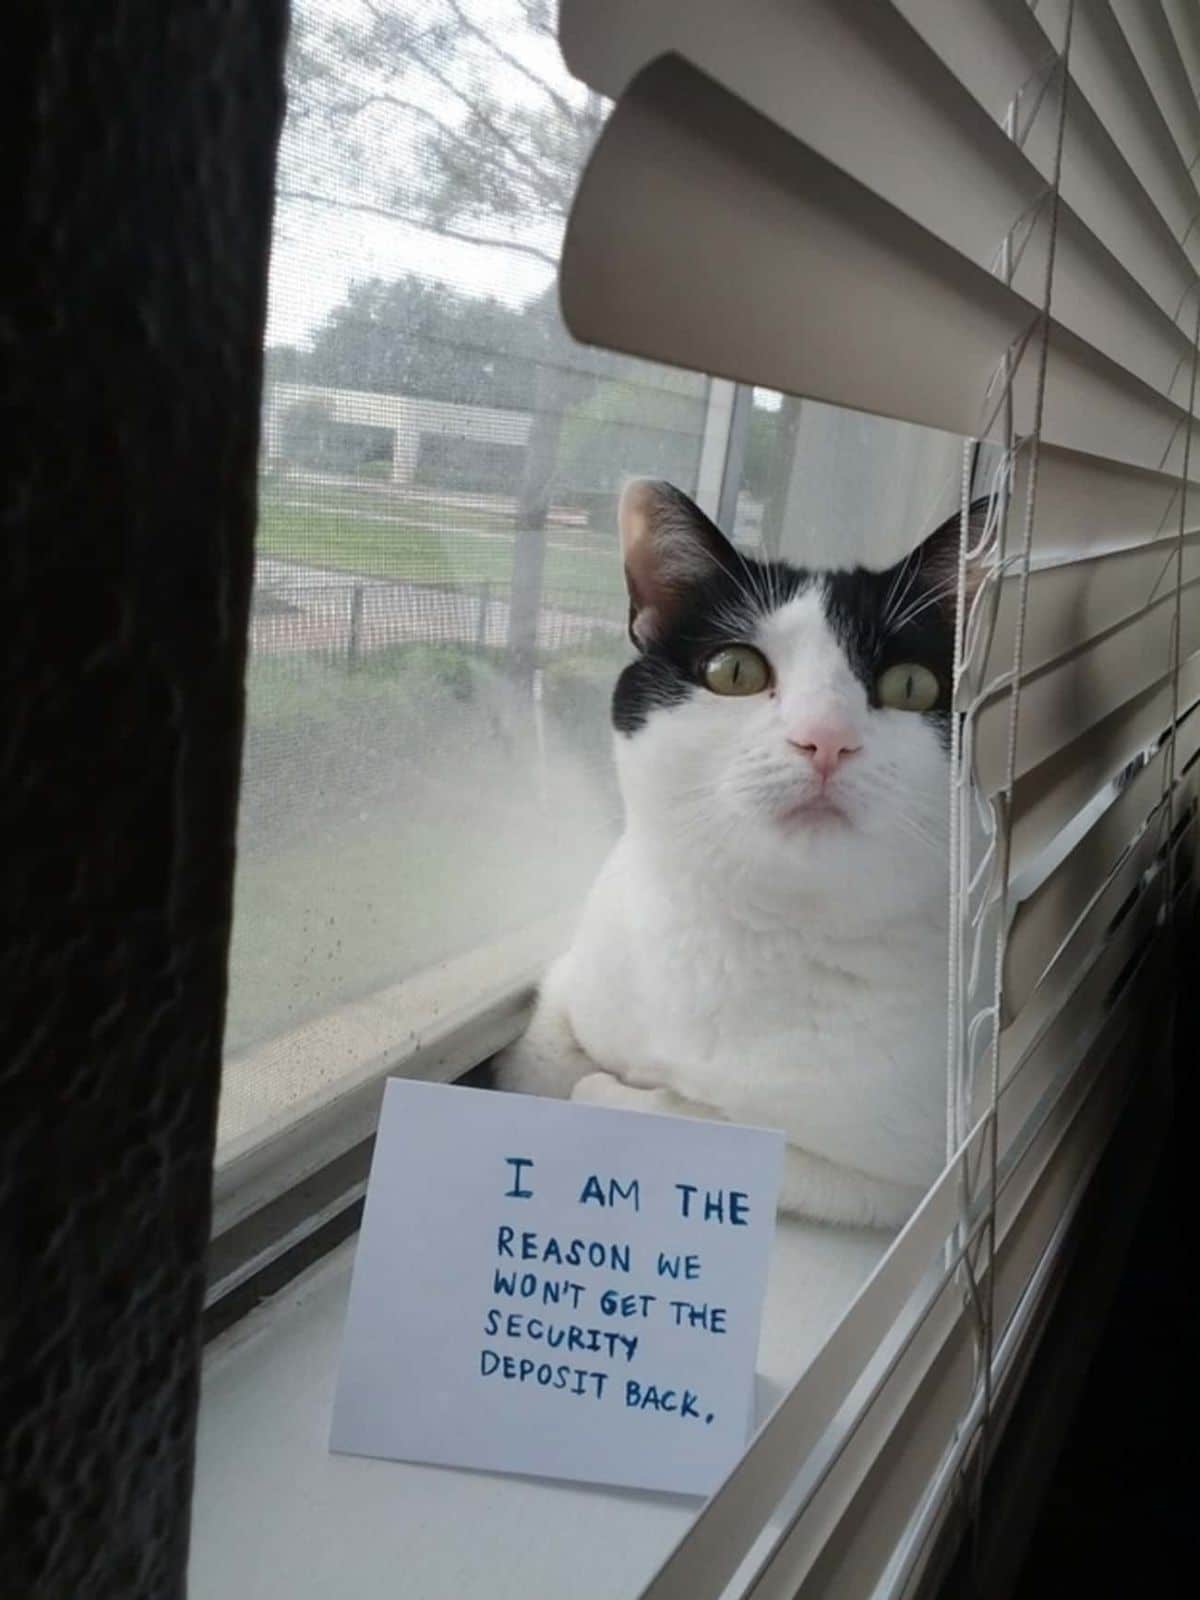 black and white cat laying on a windowsill behind window blinds with a note saying the cat is the reason they won't get their security deposit back